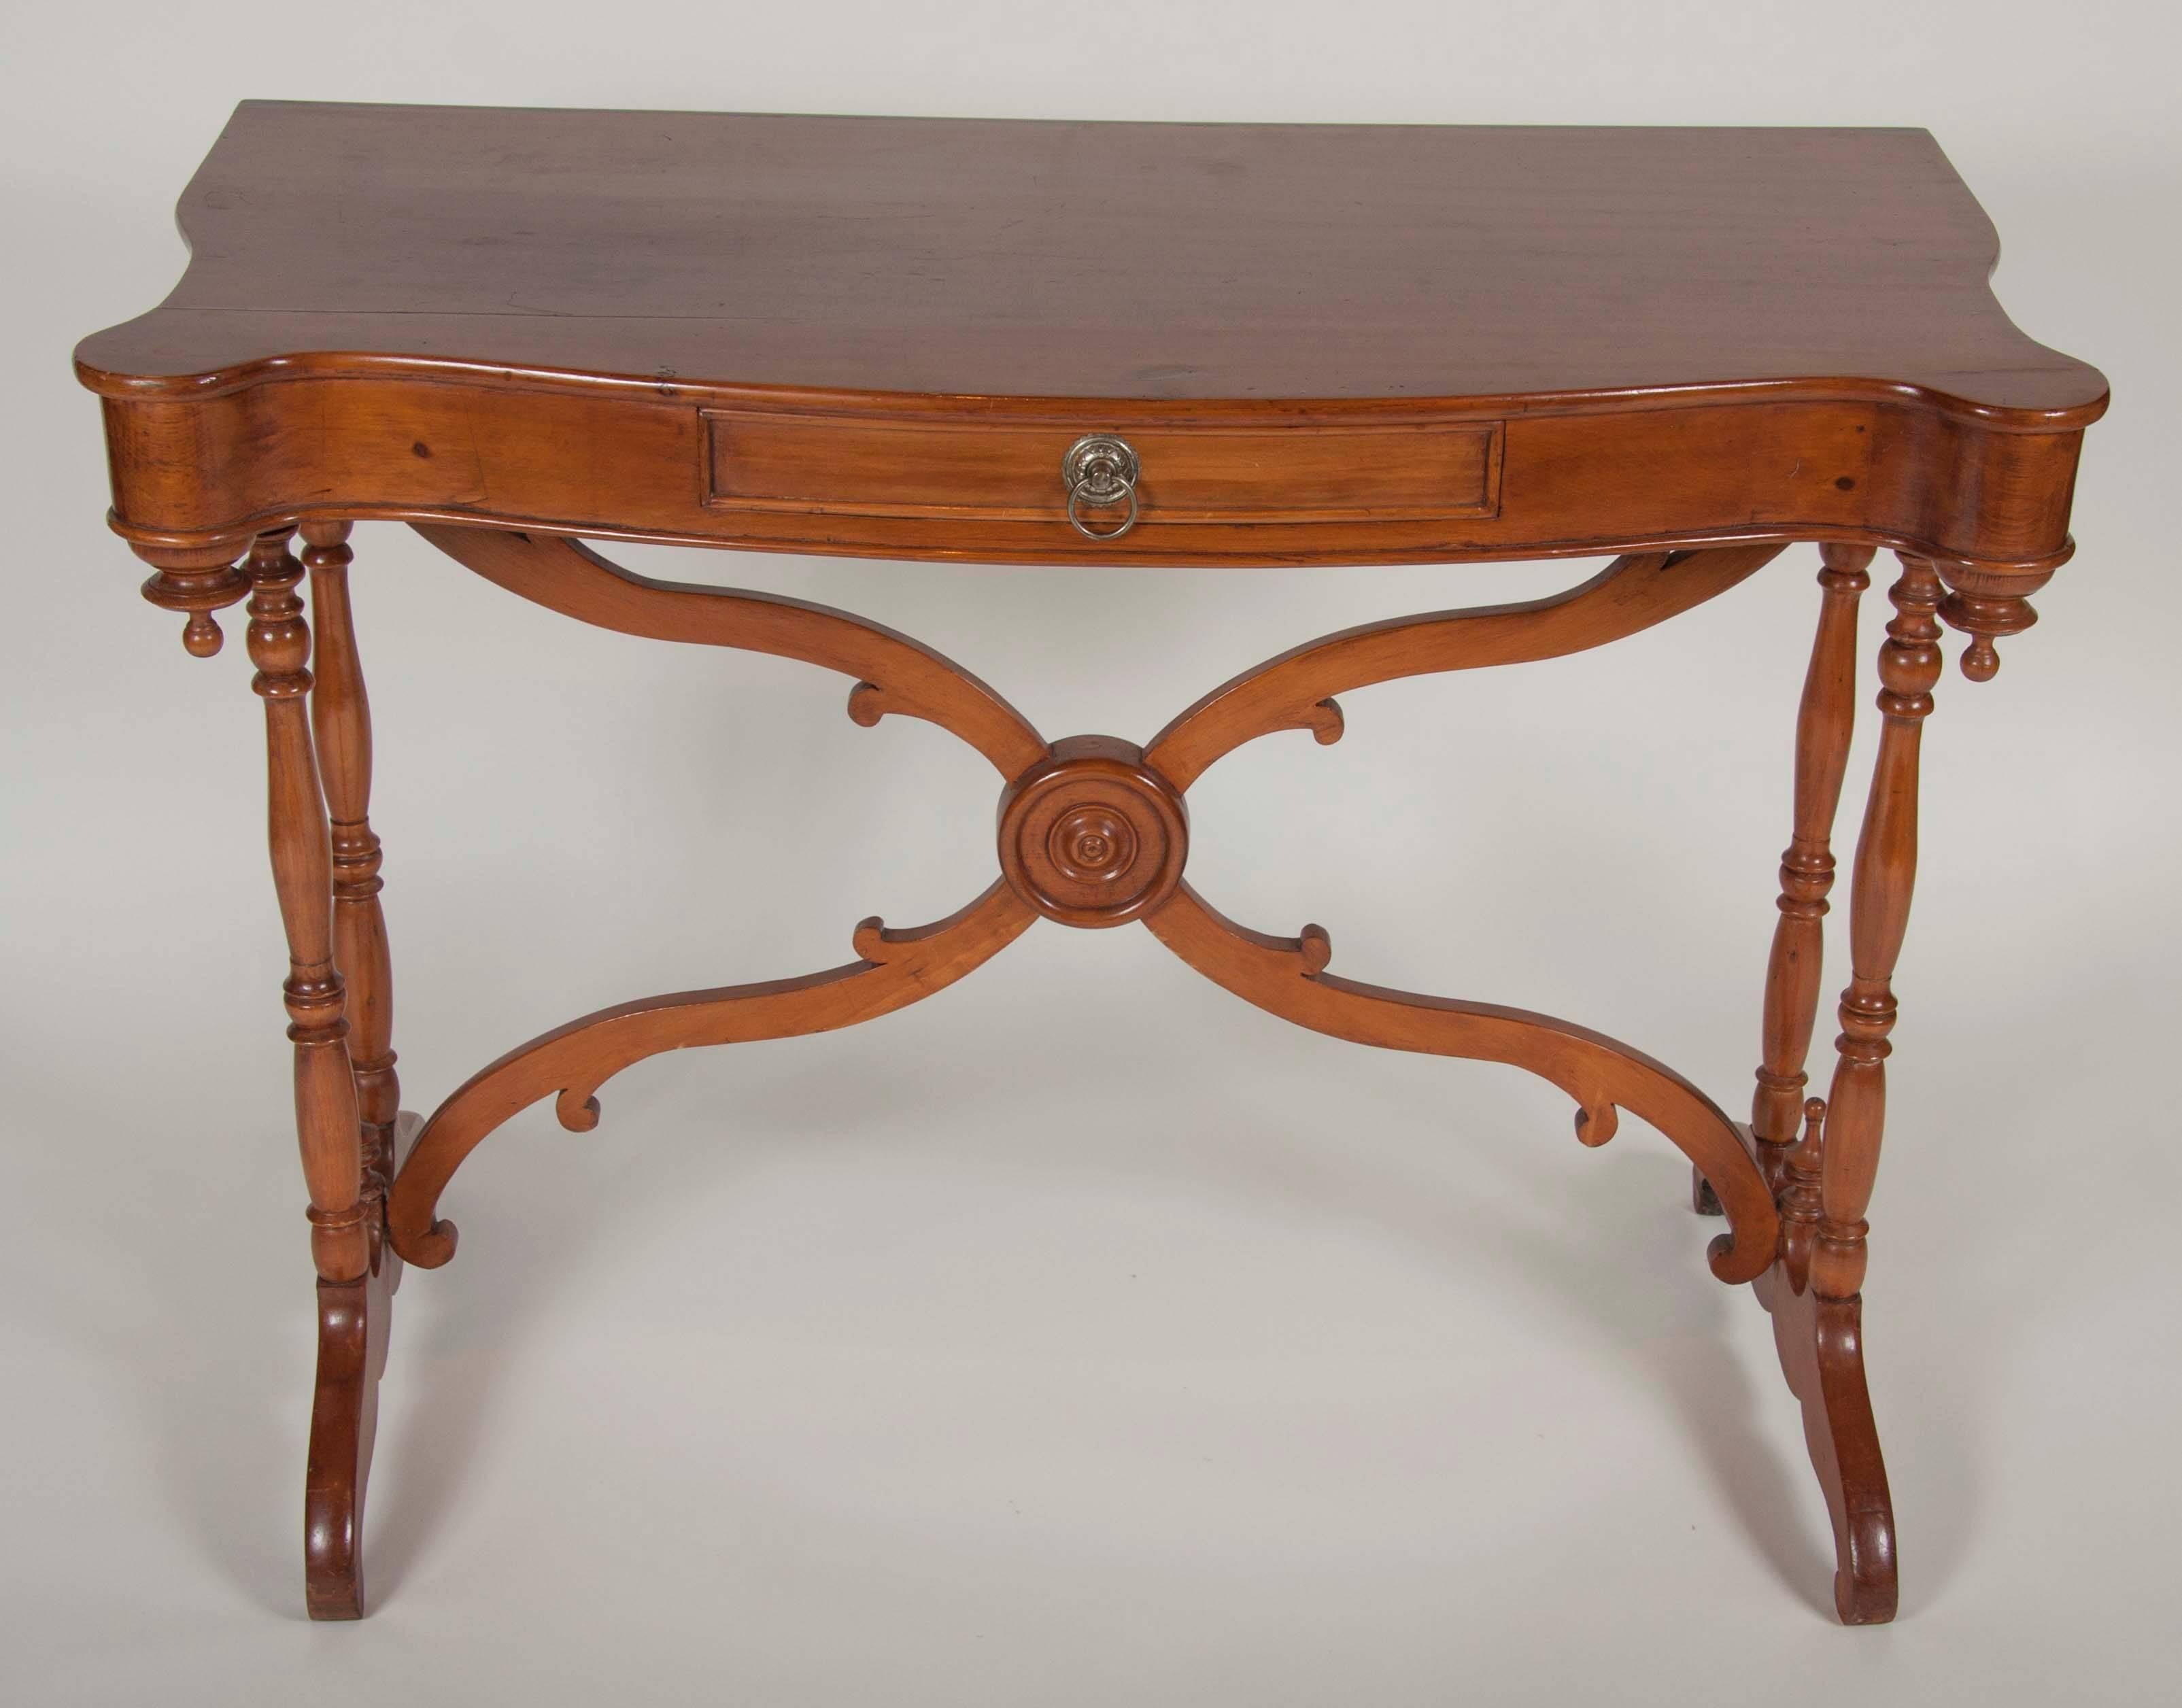 A pair of 19th century maple consoles with turned legs.